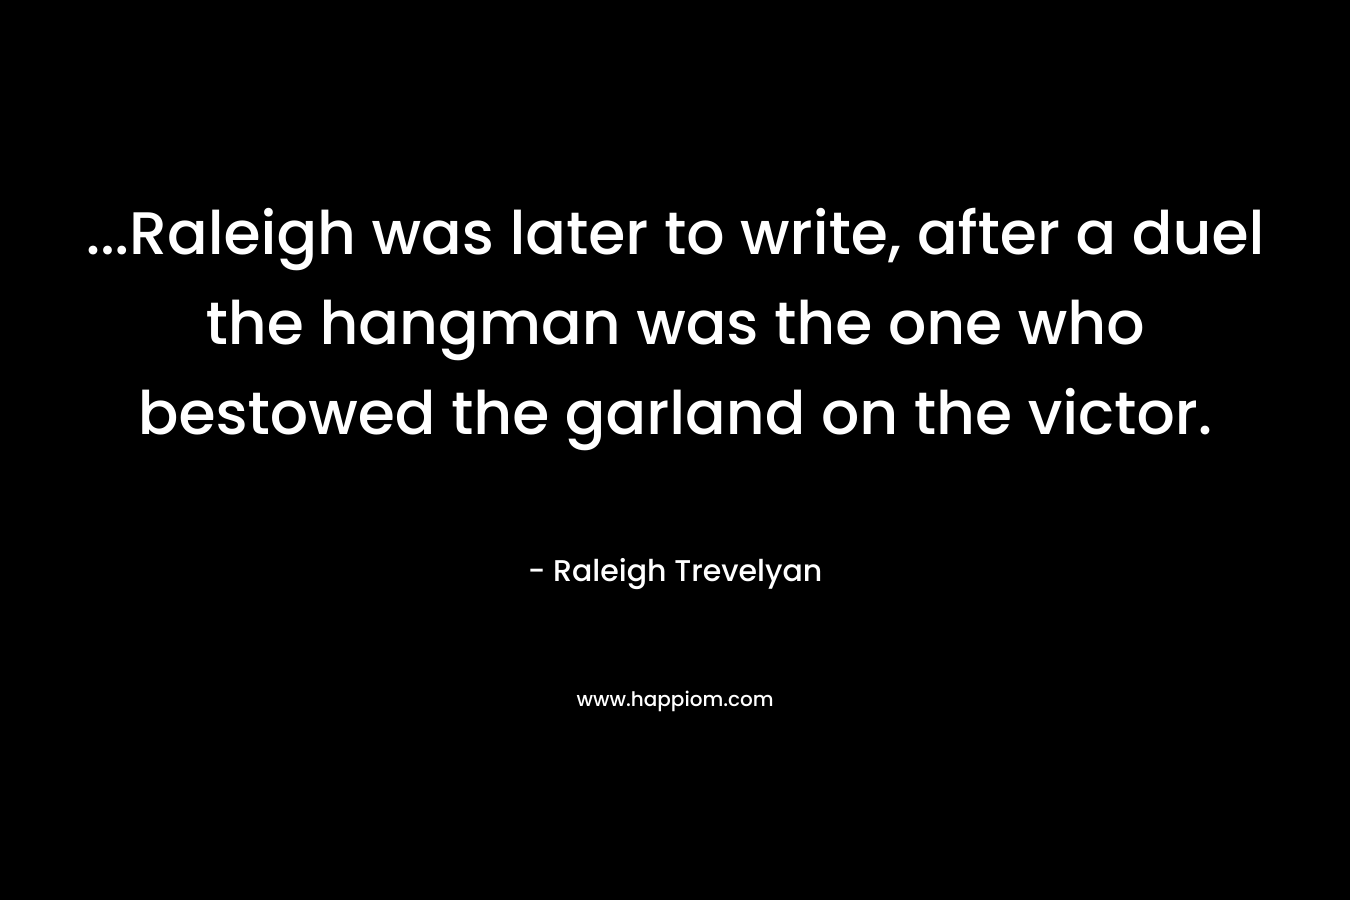 …Raleigh was later to write, after a duel the hangman was the one who bestowed the garland on the victor. – Raleigh Trevelyan